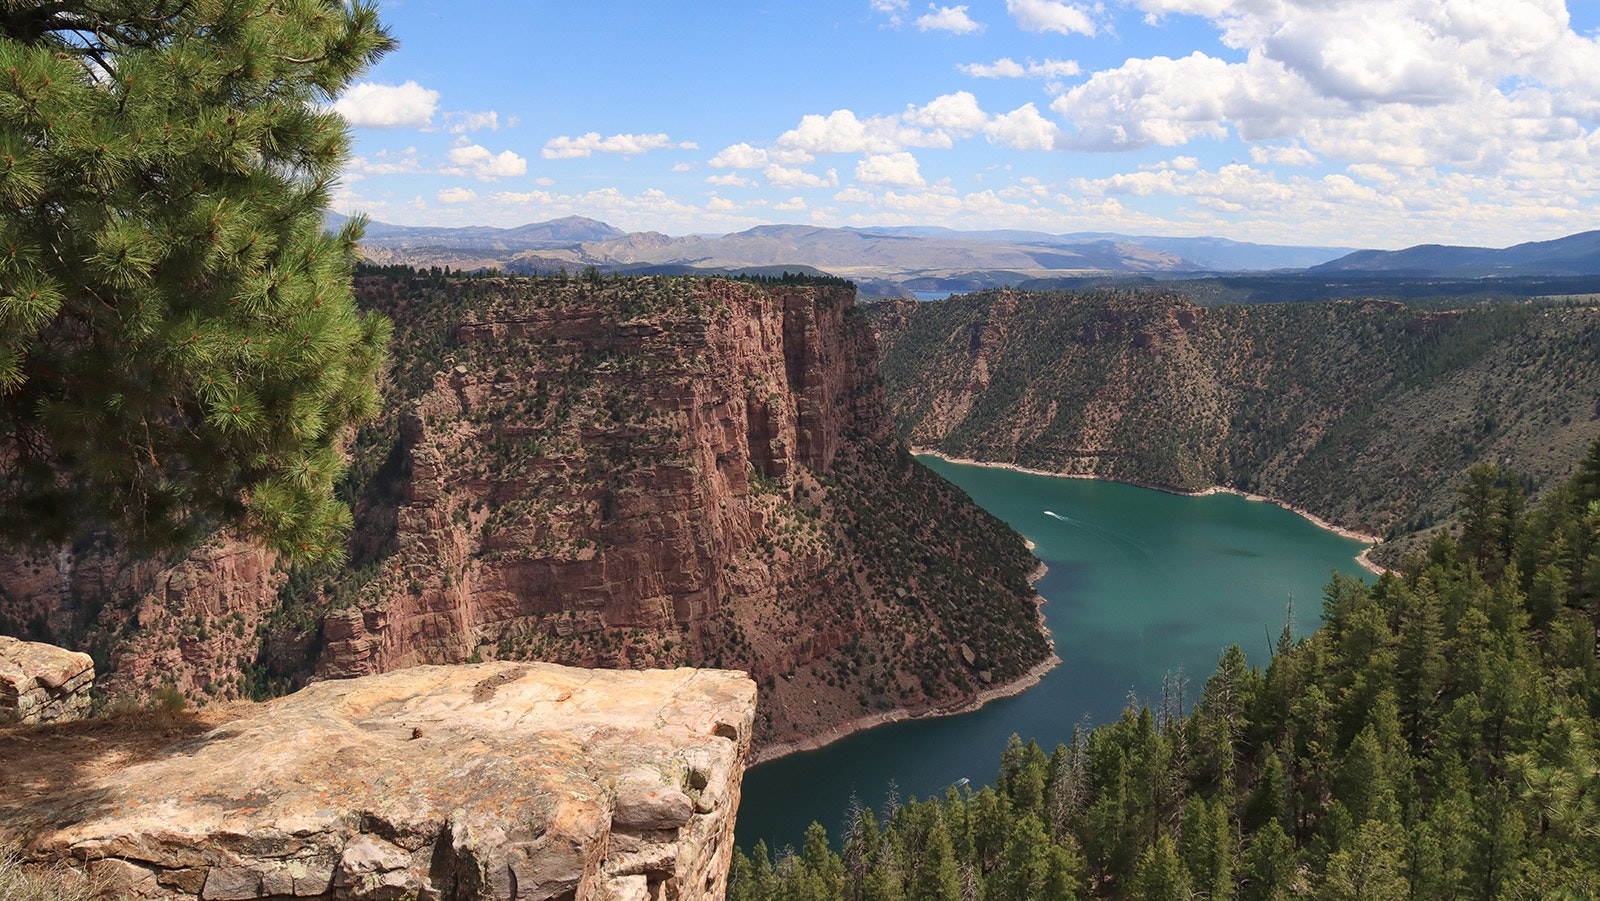 The Ute Tribe says its entitled to 500,000 acre-feet of water a year from Flaming Gorge/Green River.